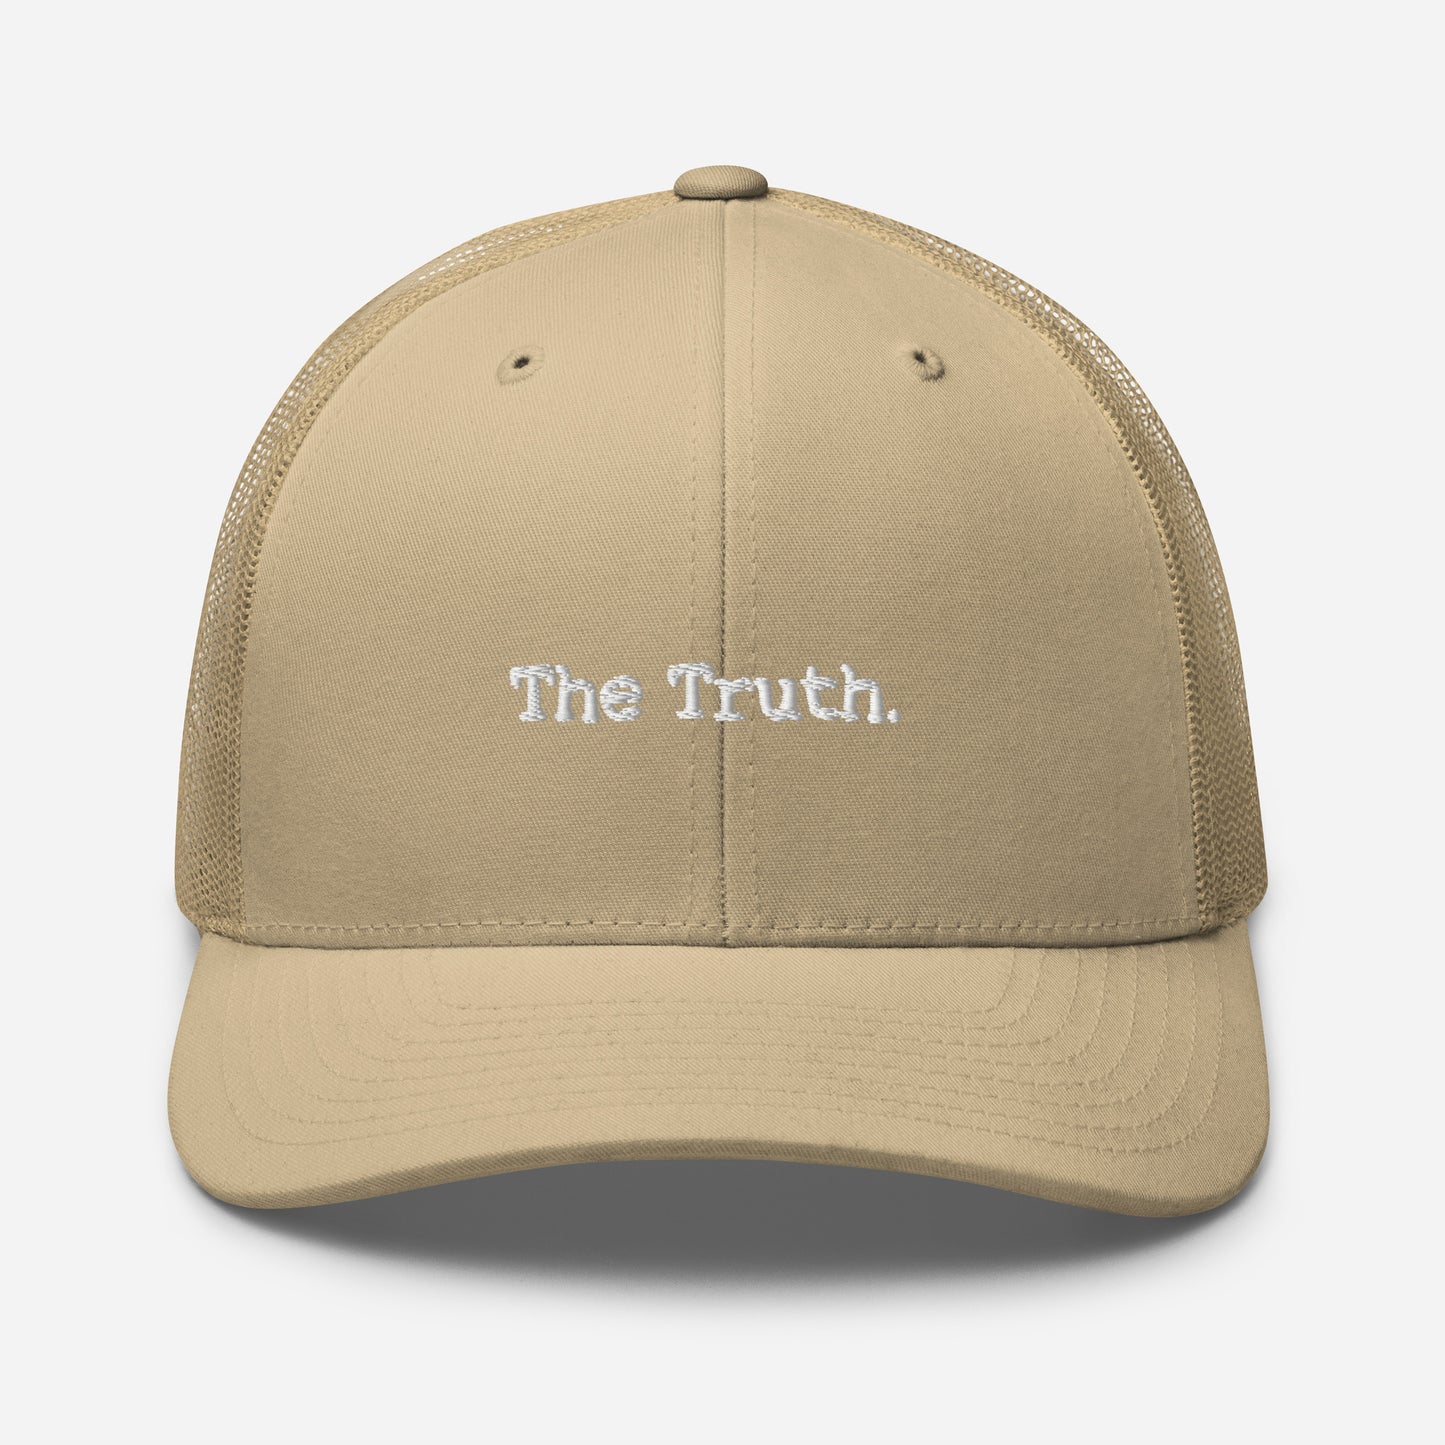 THE ABSOLUTE TRUTH Trucker Cap